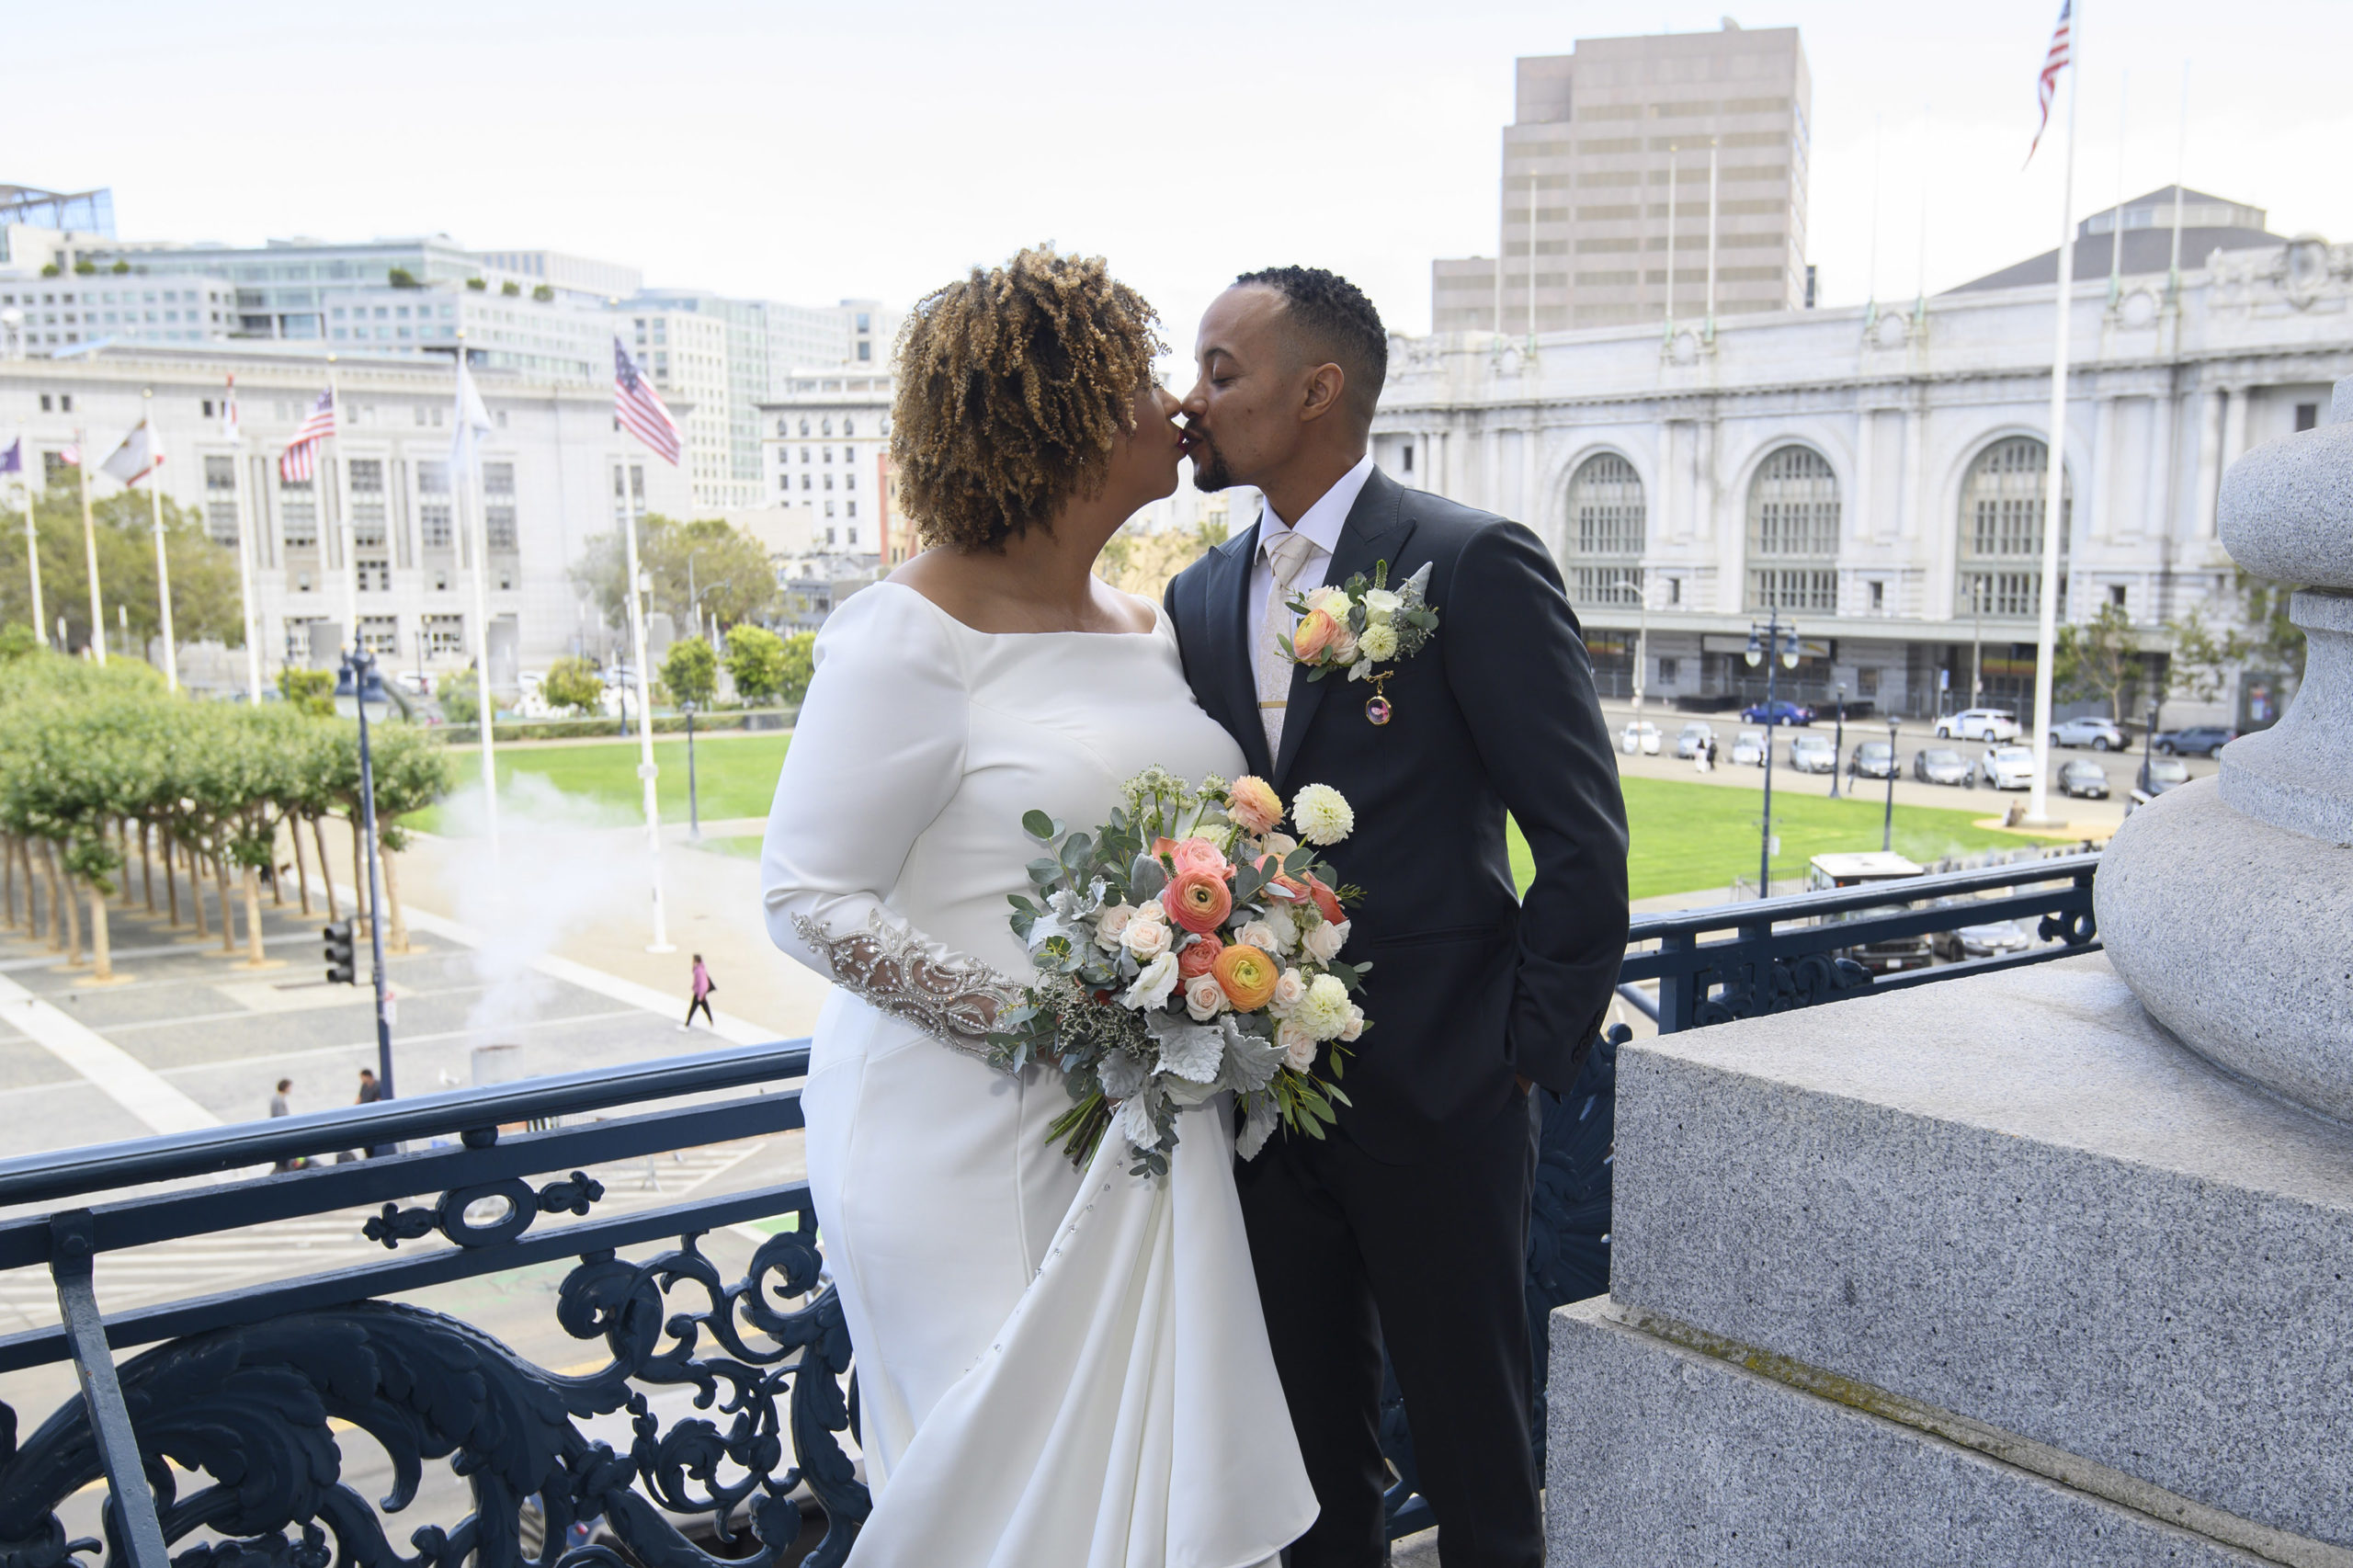 City Hall Bride and Groom pose for a picture on the Mayor's Balcony outside